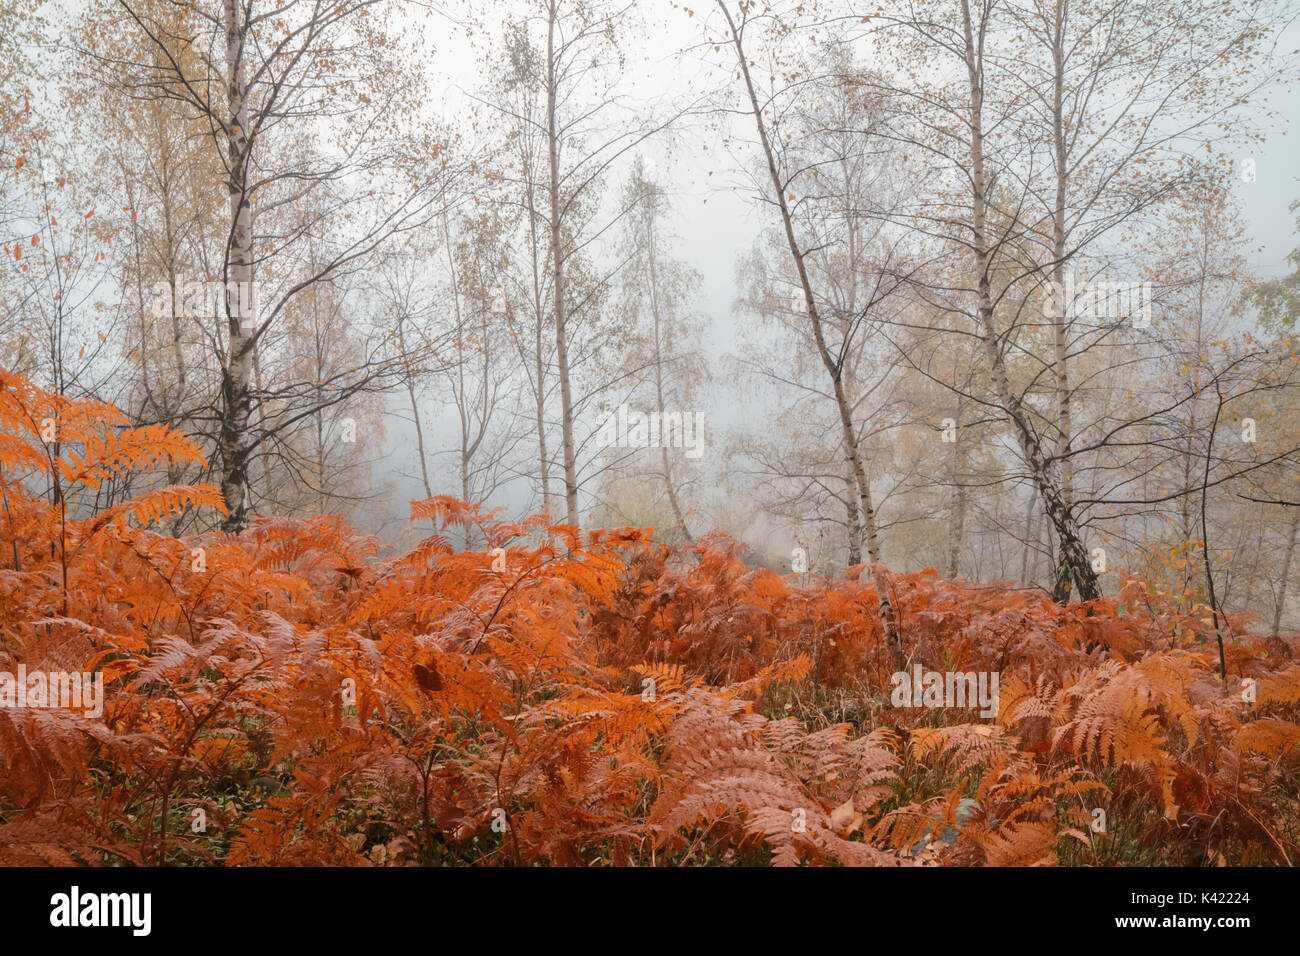 Autumn forest in the morning mist. Stock Photo